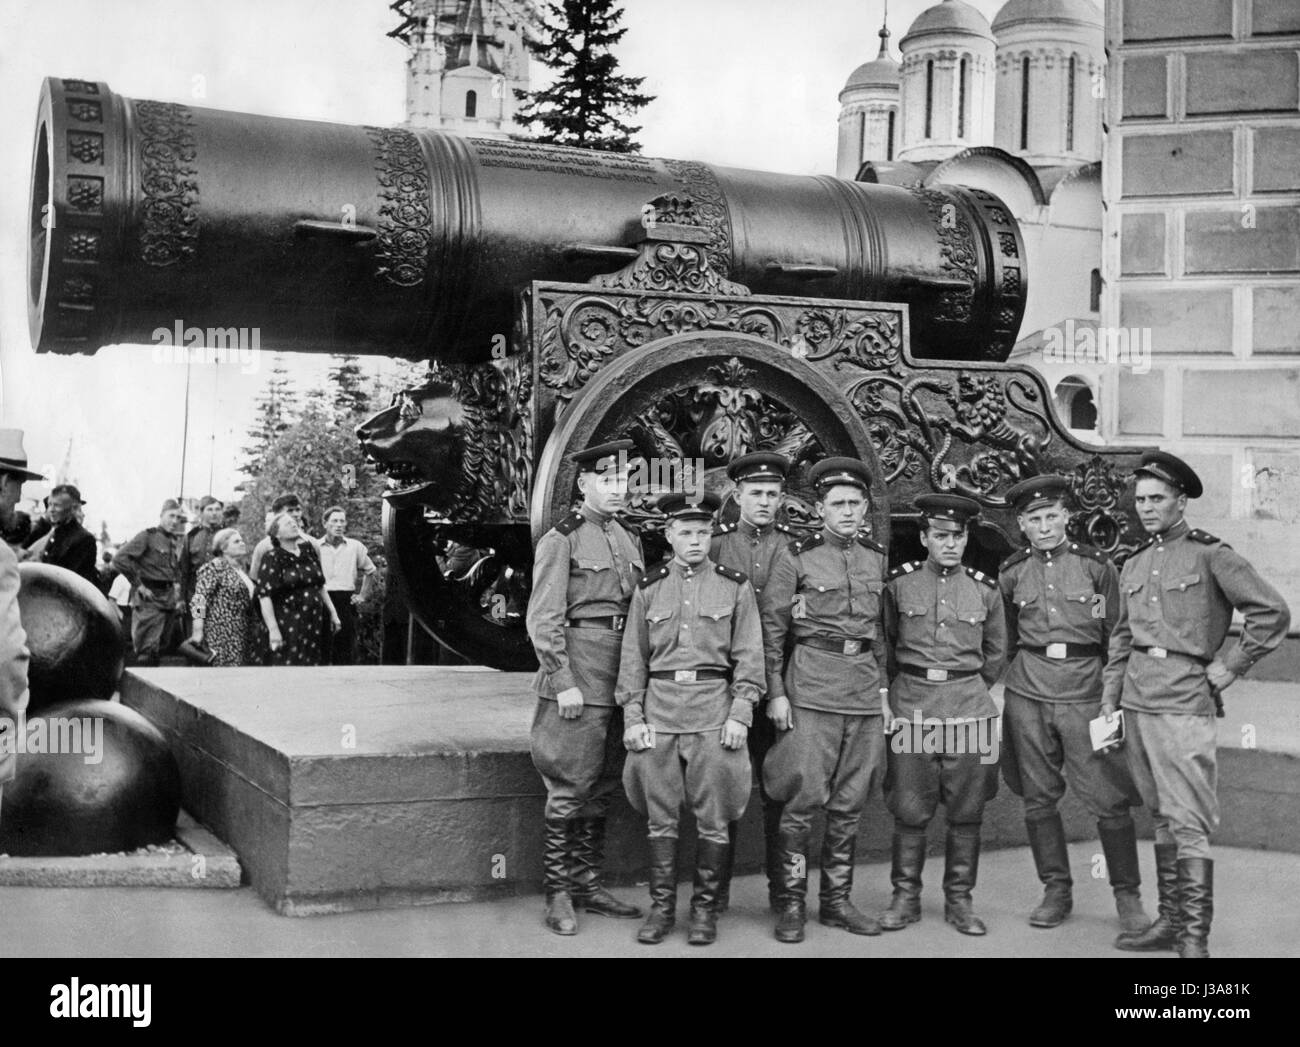 The Tsar Cannon in the Kremlin in Moscow Stock Photo